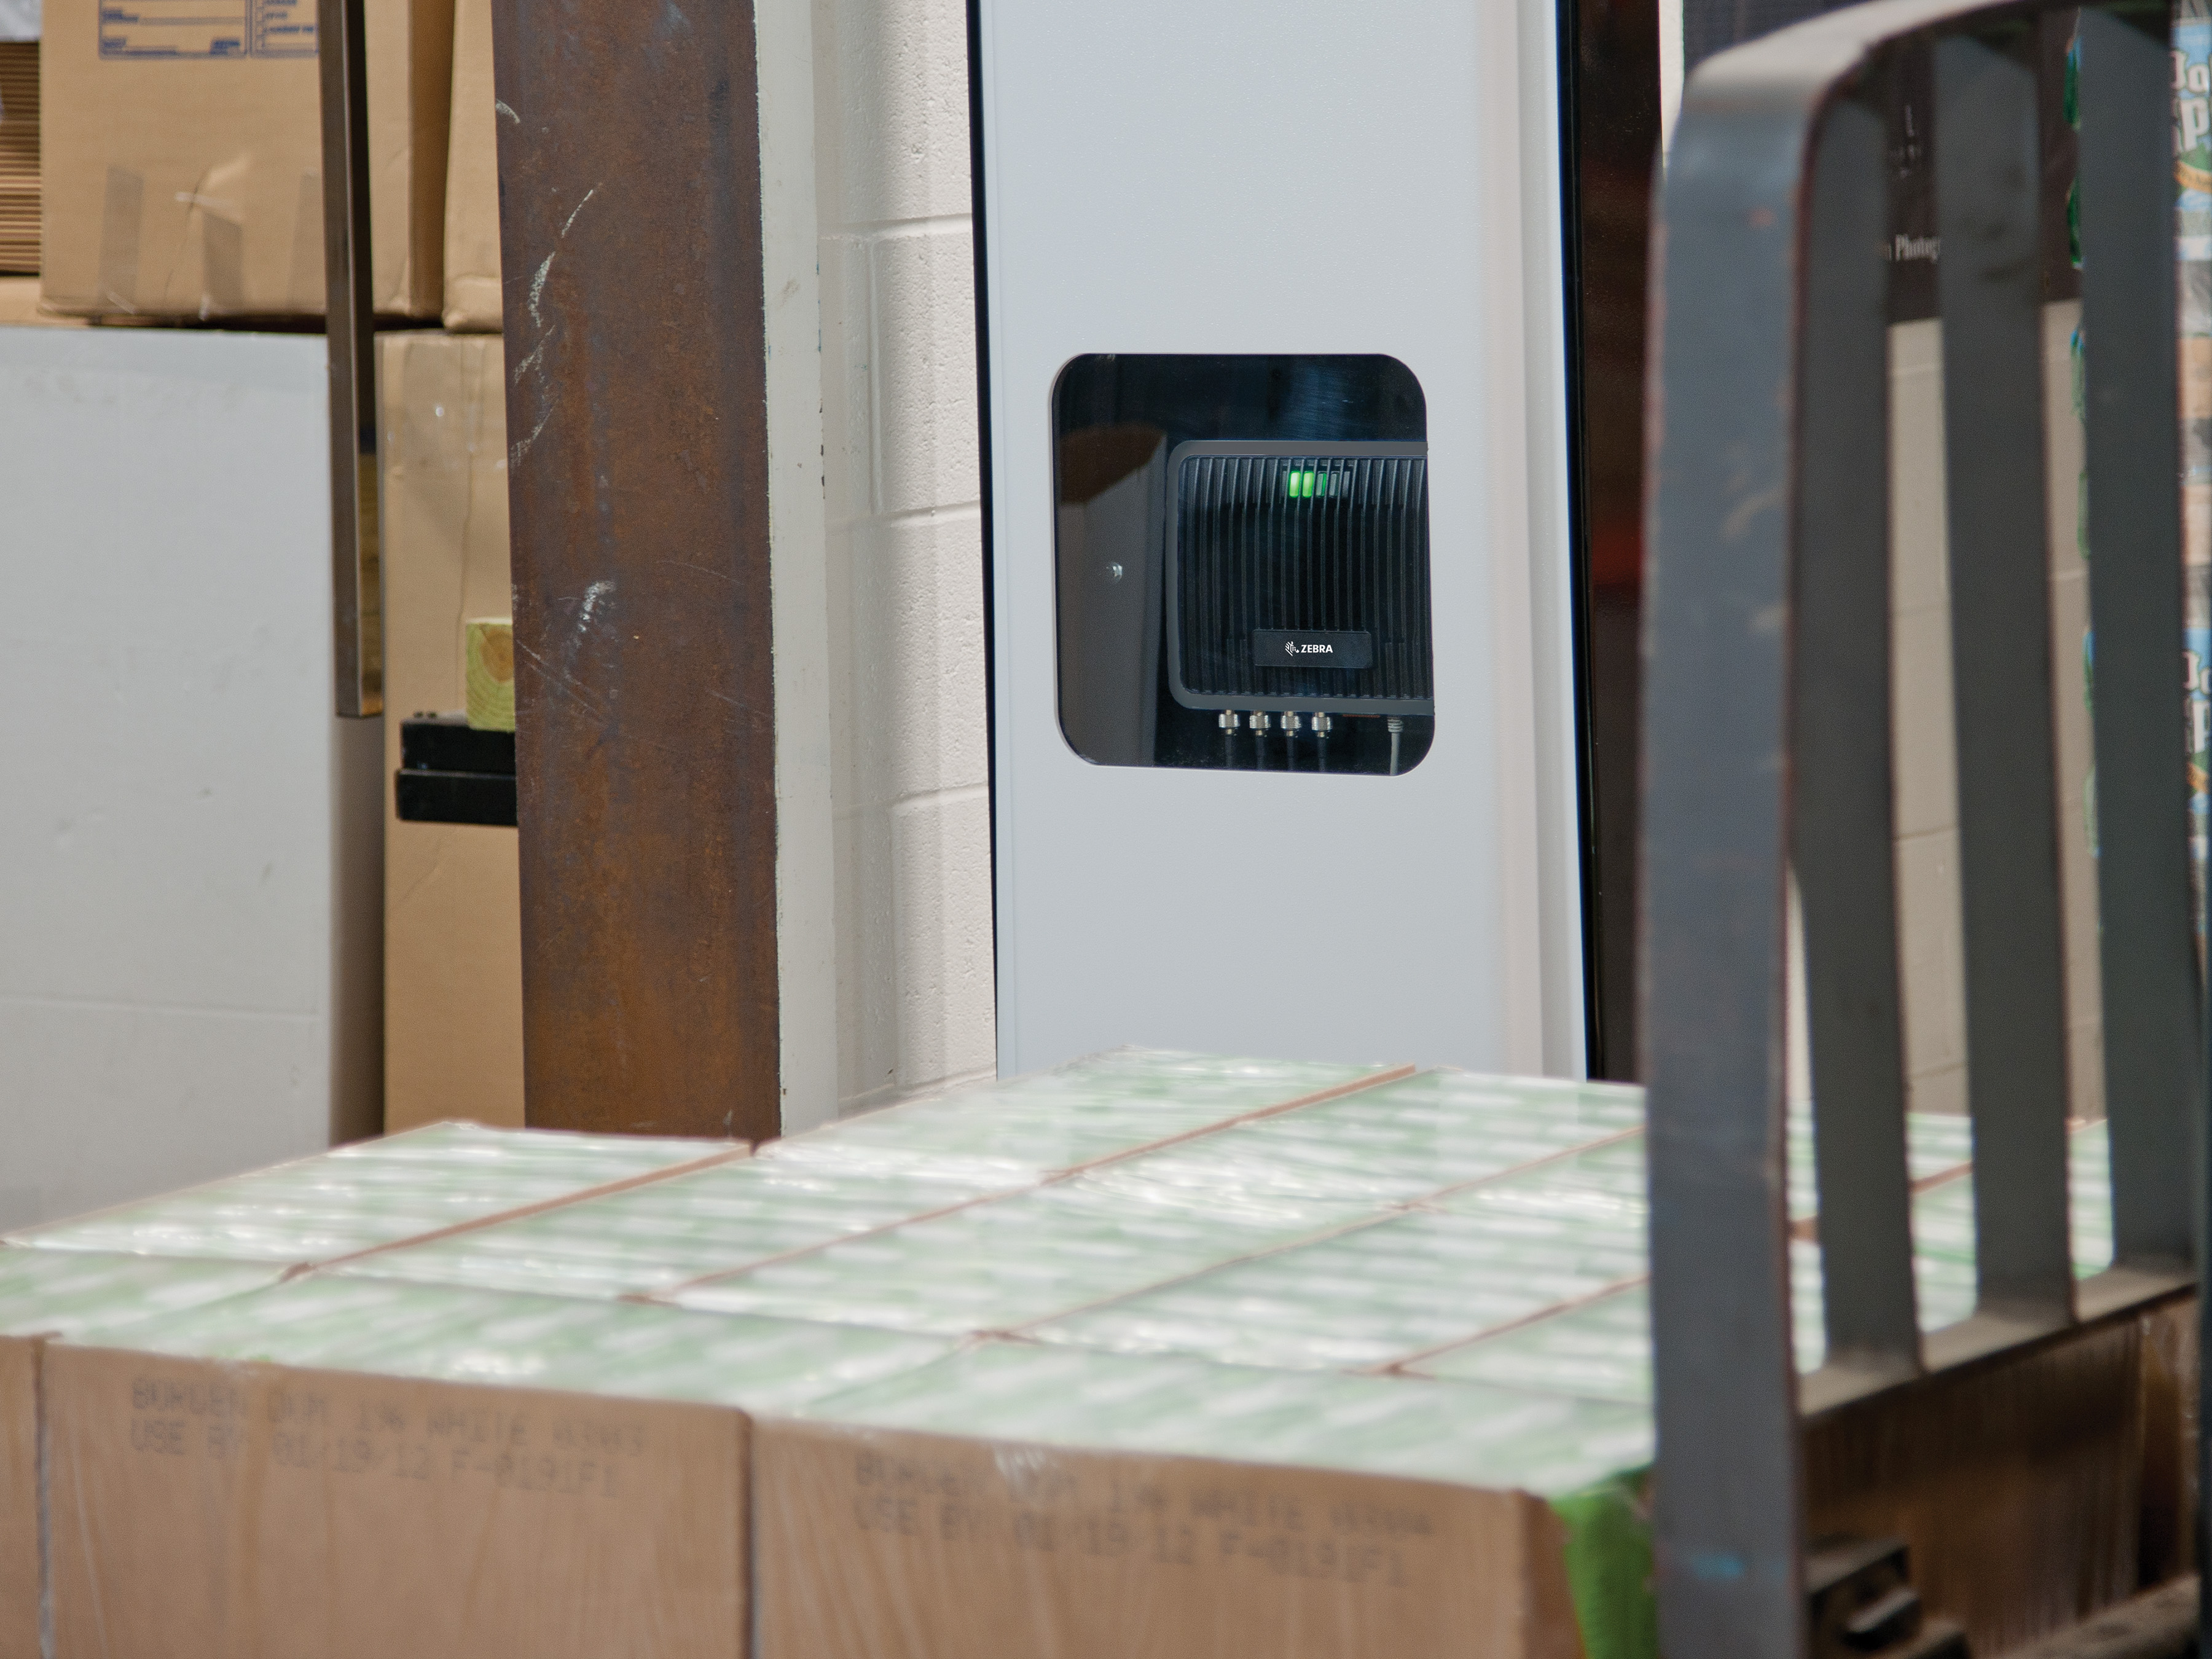 Fixed Zebra RFID reader automatically tracks inventory as they move through the warehouse 